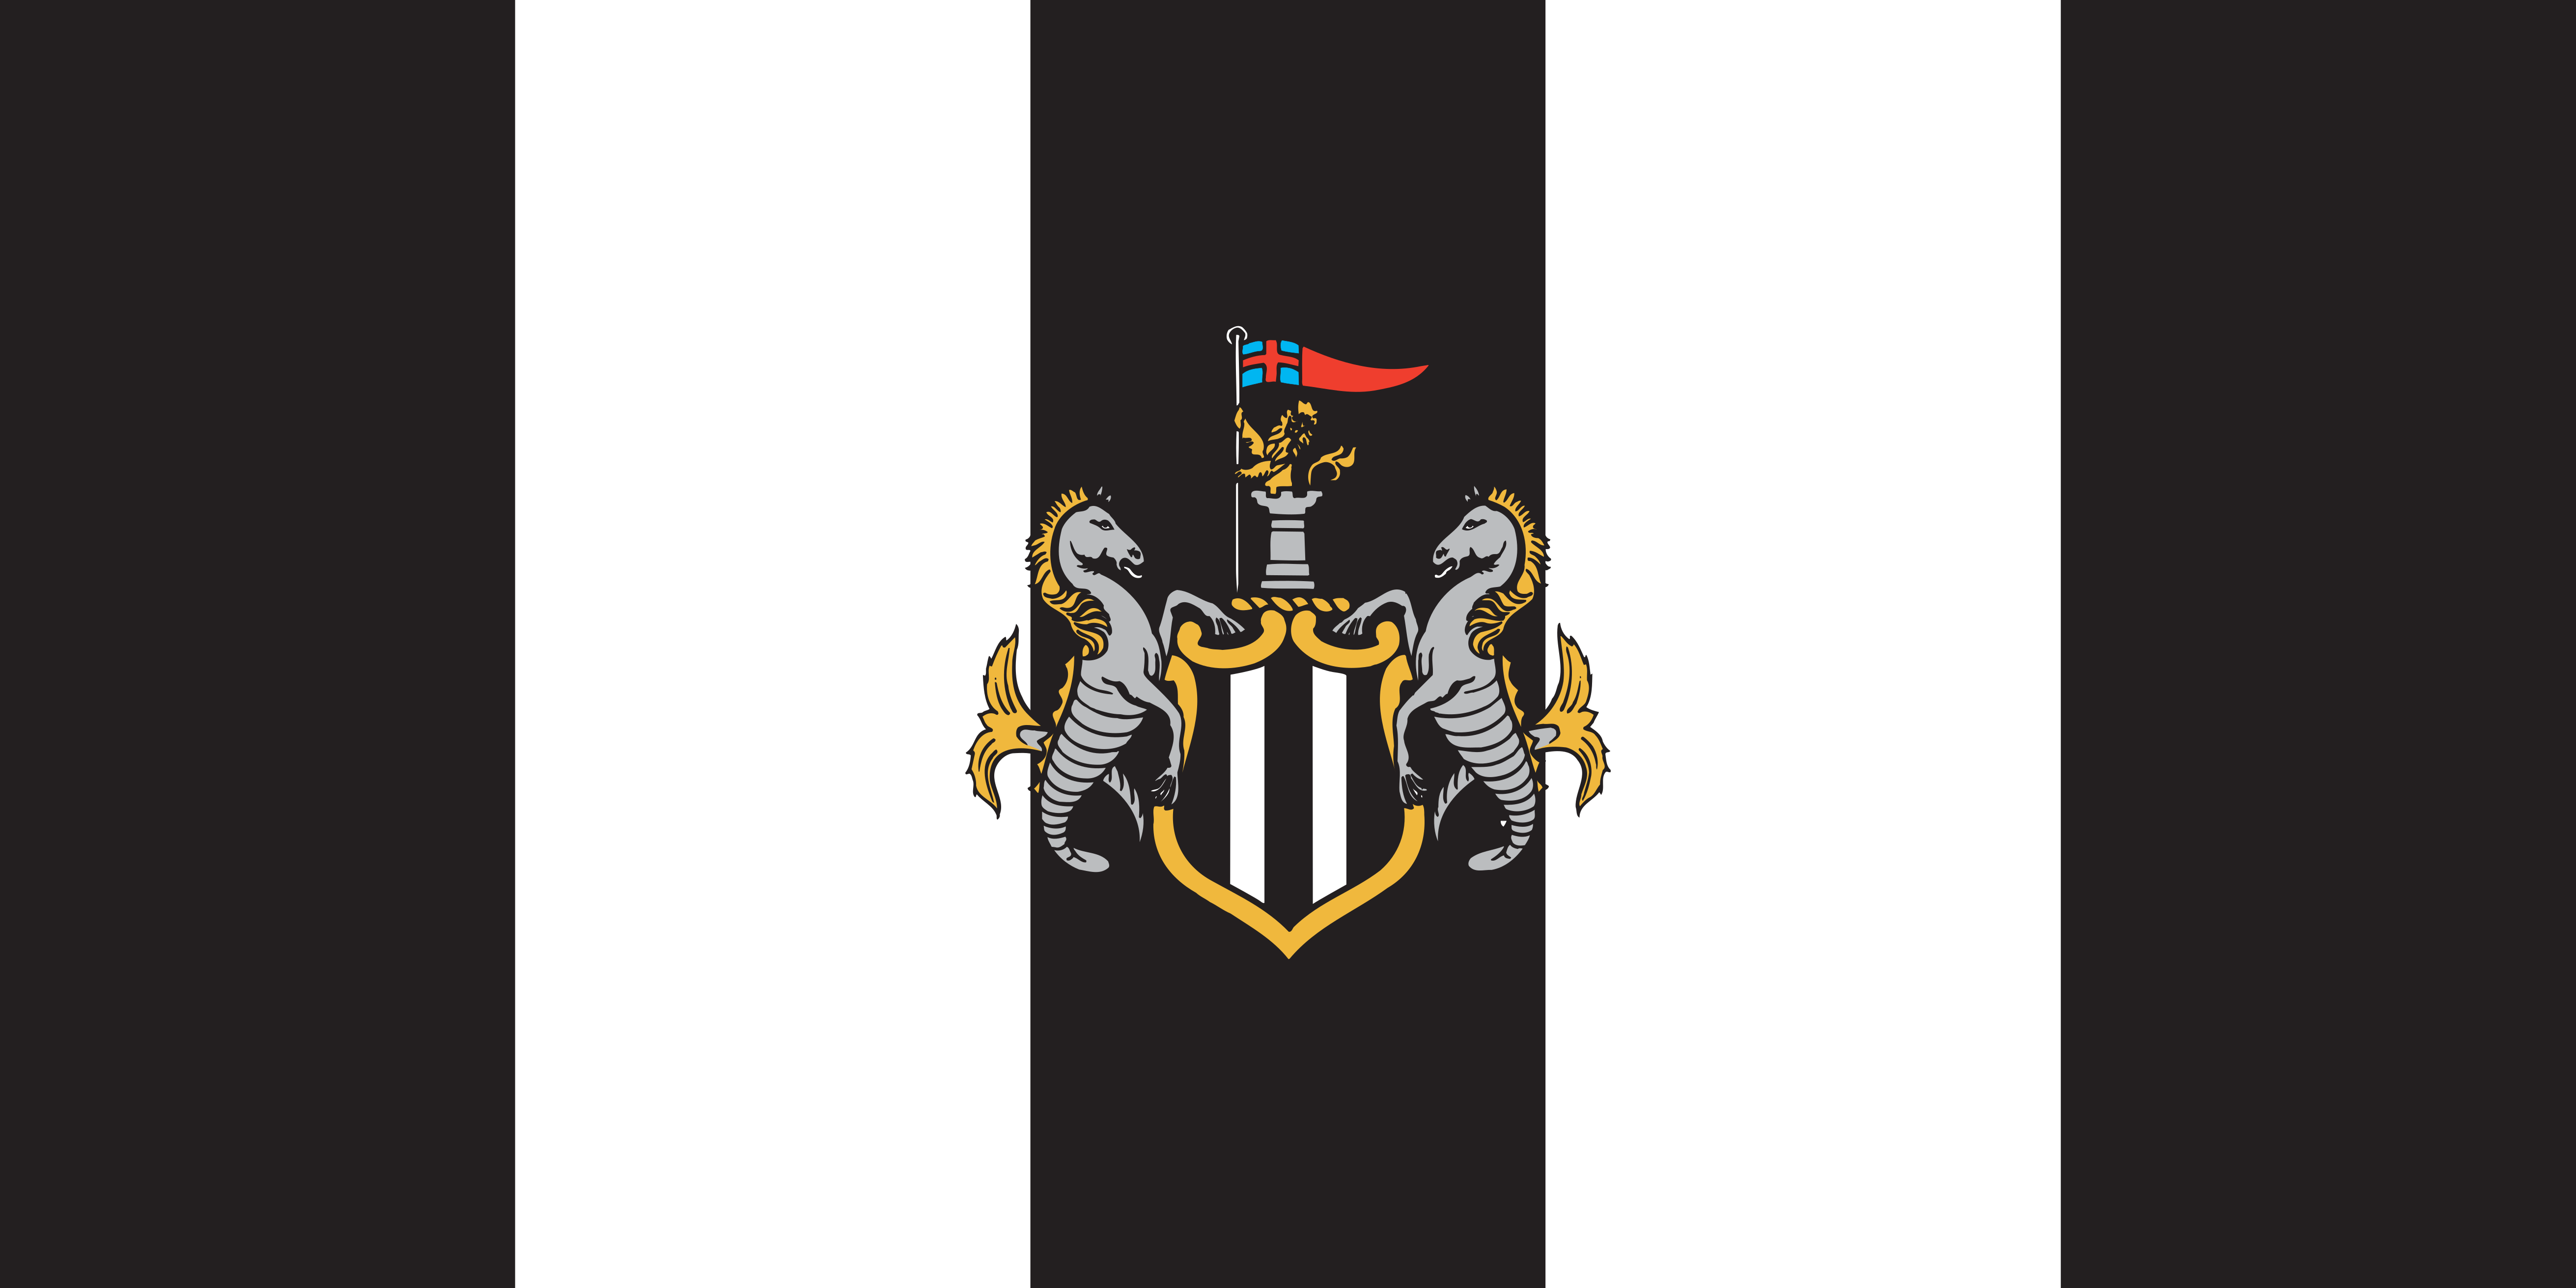 Newcastle United F.C. Wallpapers